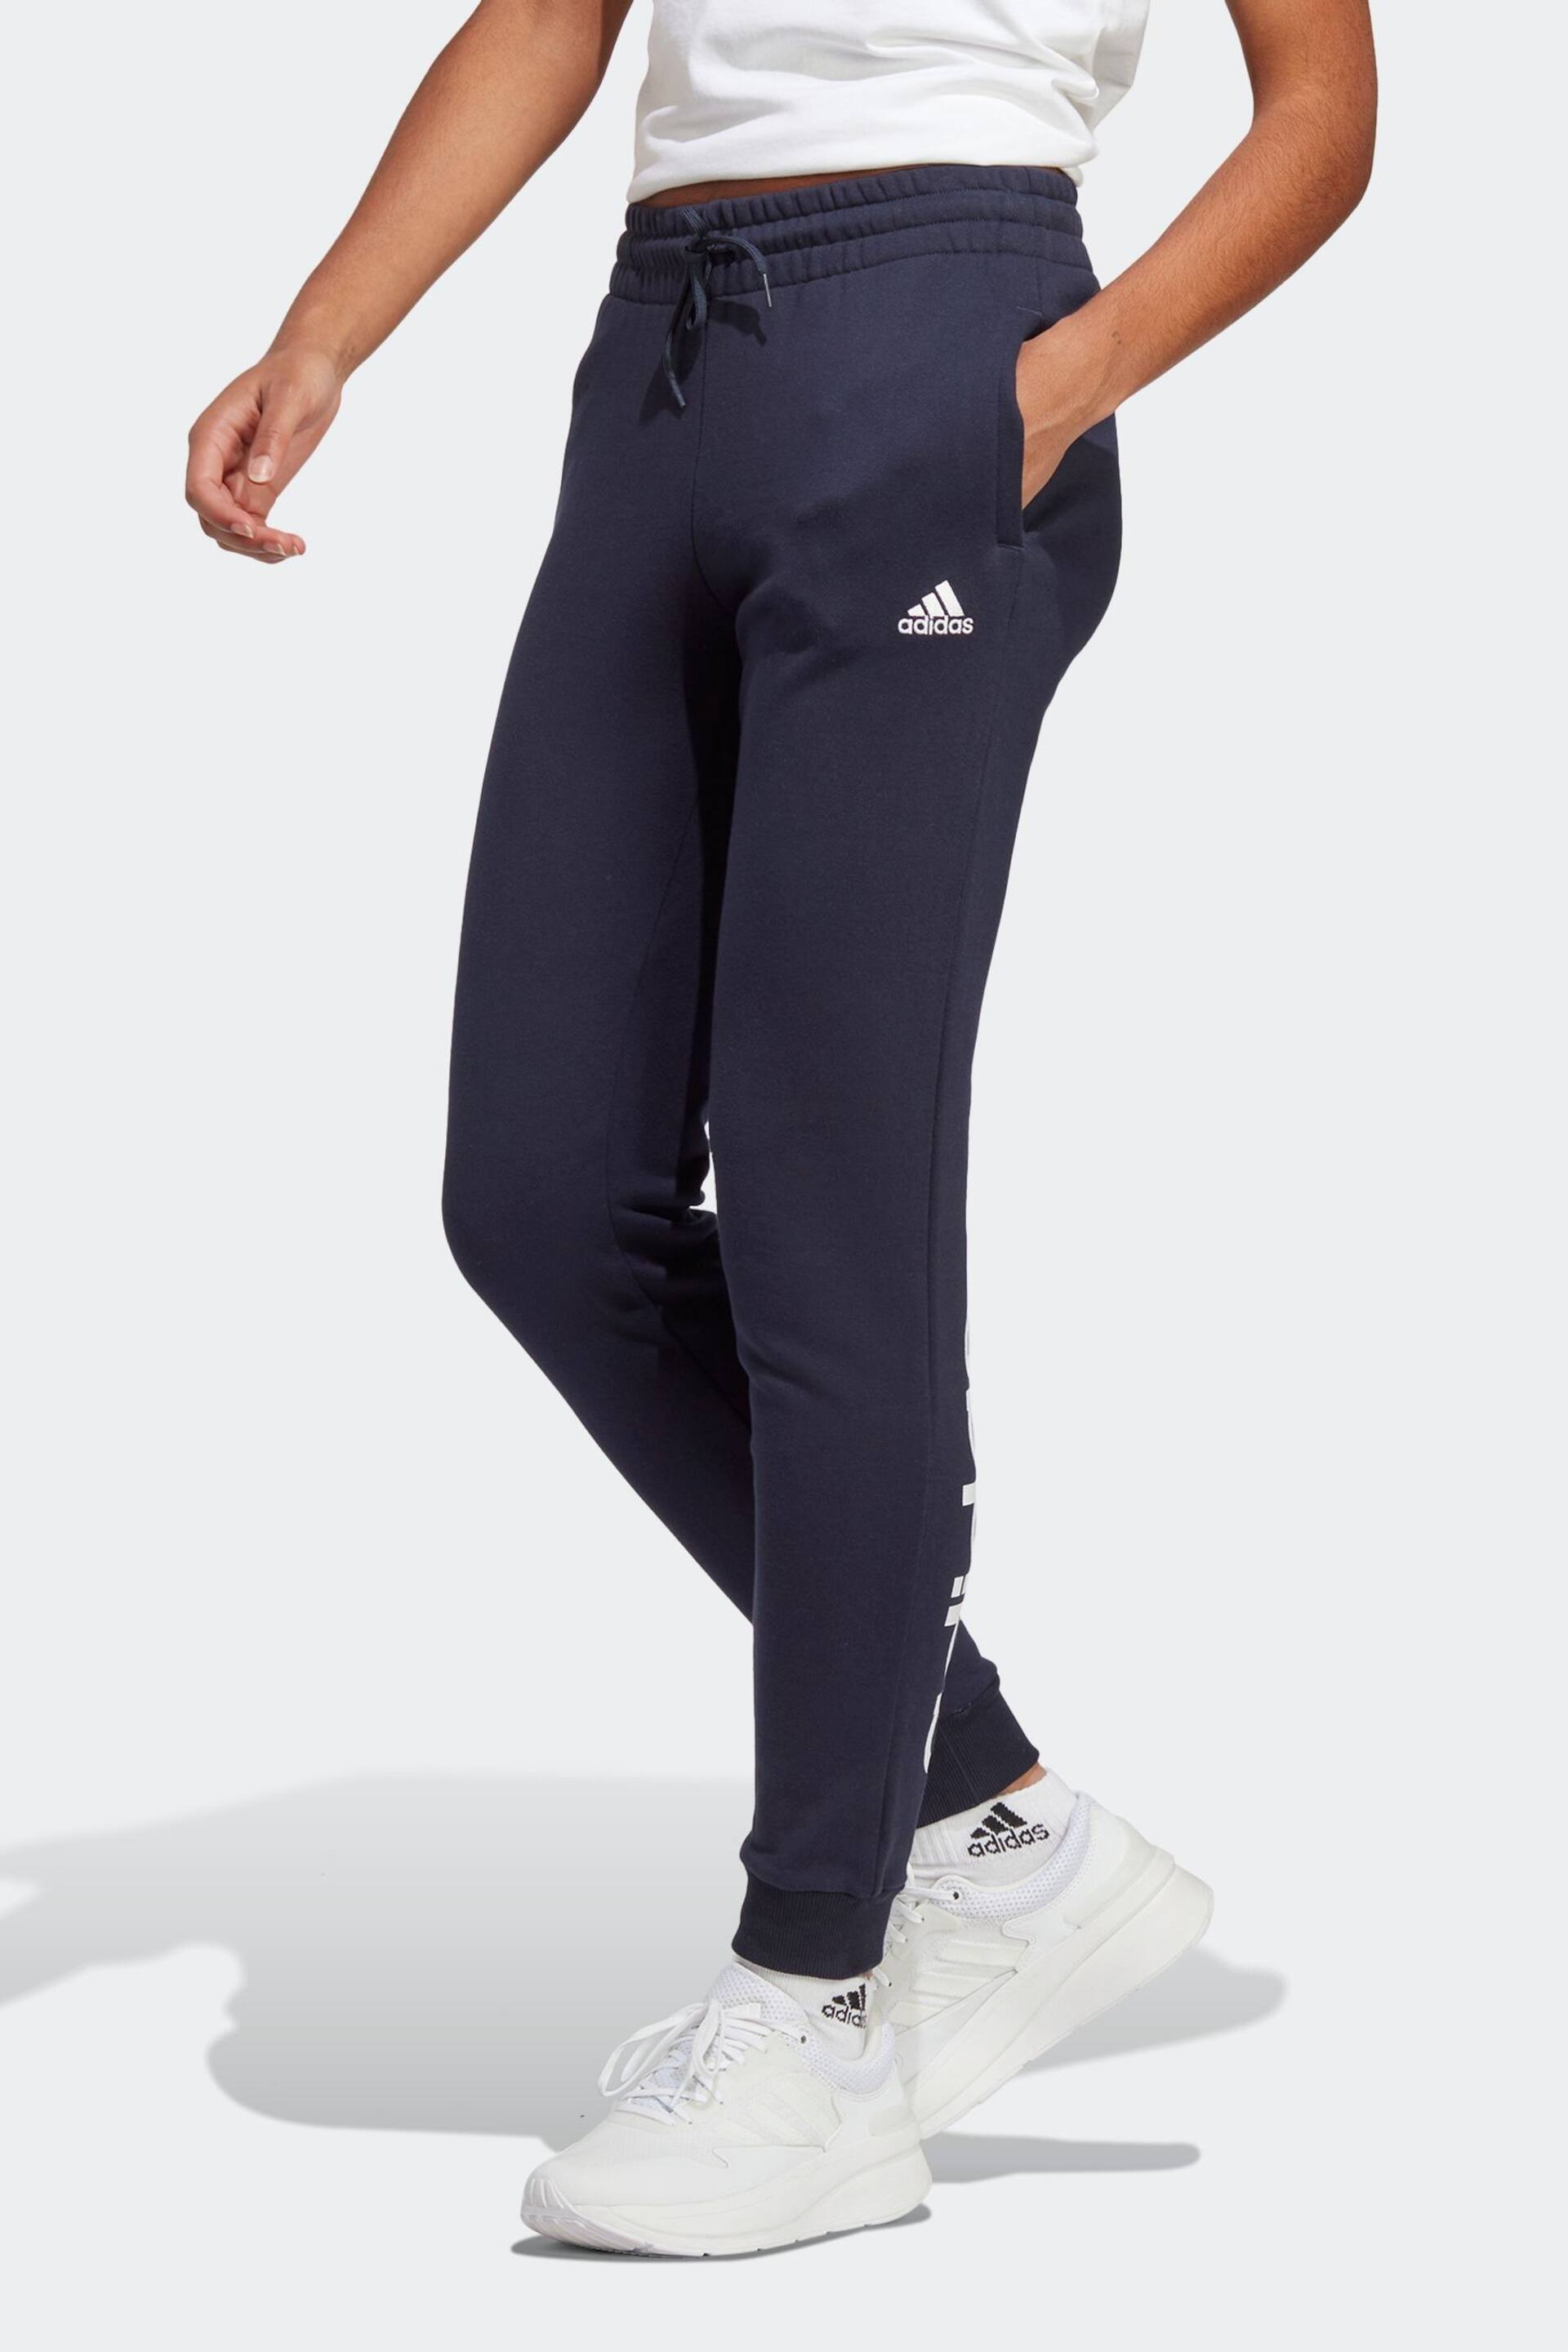 adidas Blue Sportswear Essentials Linear French Terry Cuffed Joggers - Image 1 of 6